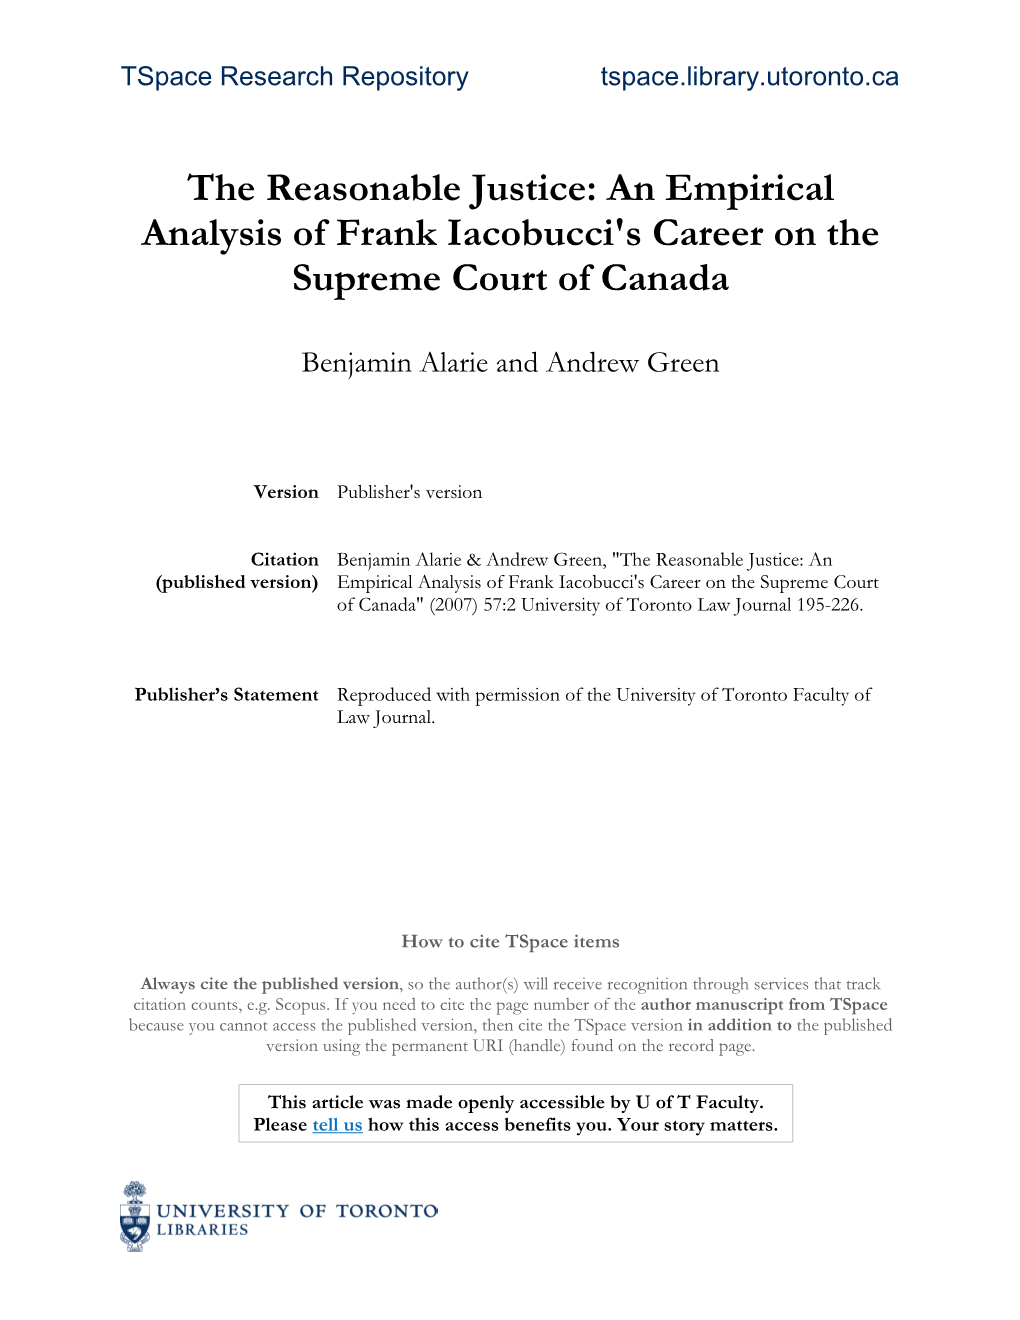 The Reasonable Justice: an Empirical Analysis of Frank Iacobucci's Career on the Supreme Court of Canada